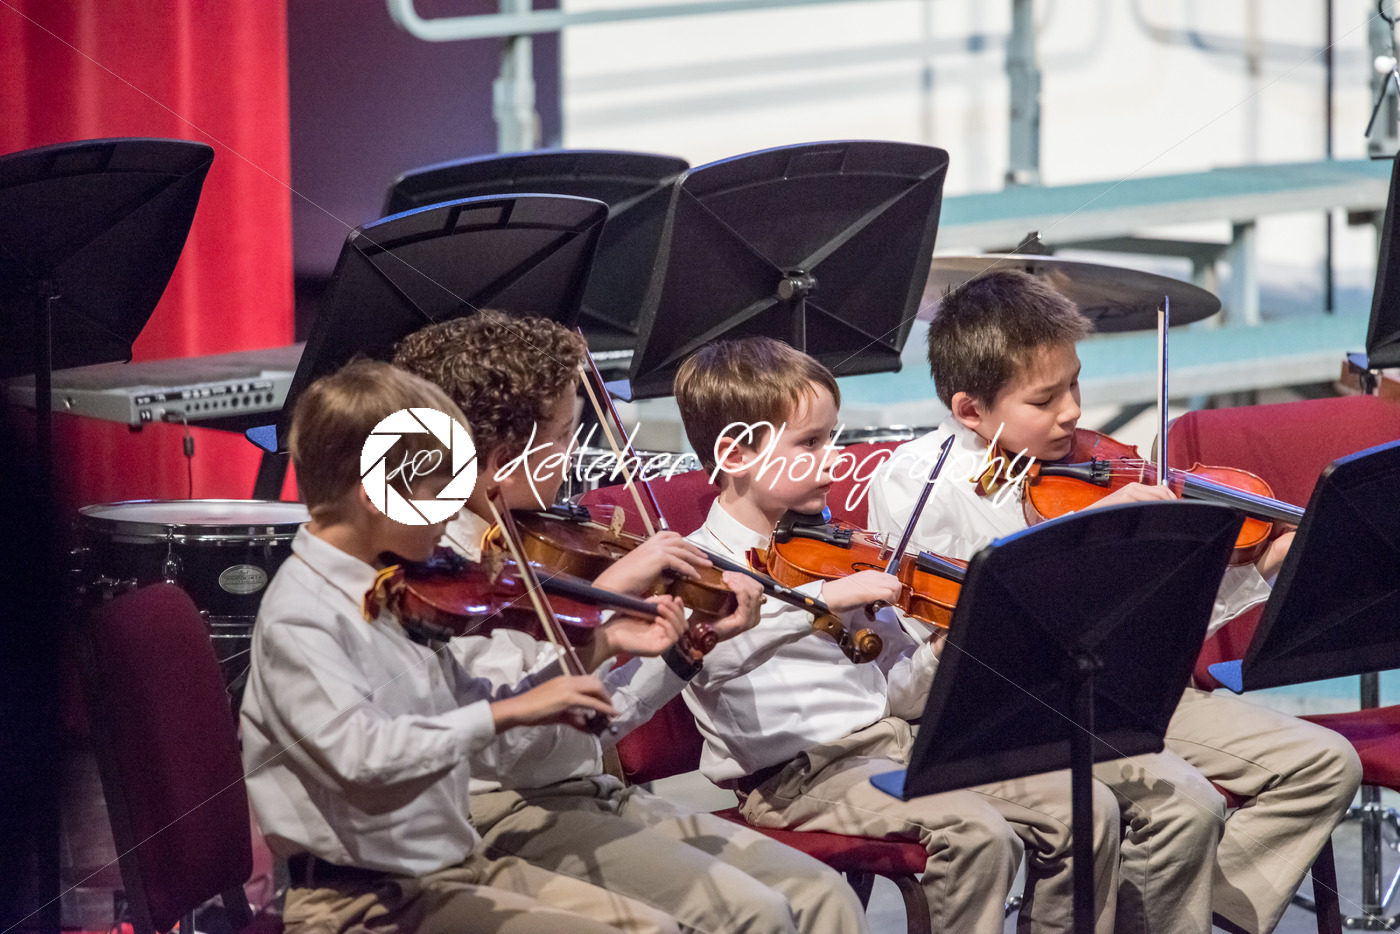 HAVERFORD, PA – DECEMBER 11: Winter Concert at The Haverford School - Kelleher Photography Store